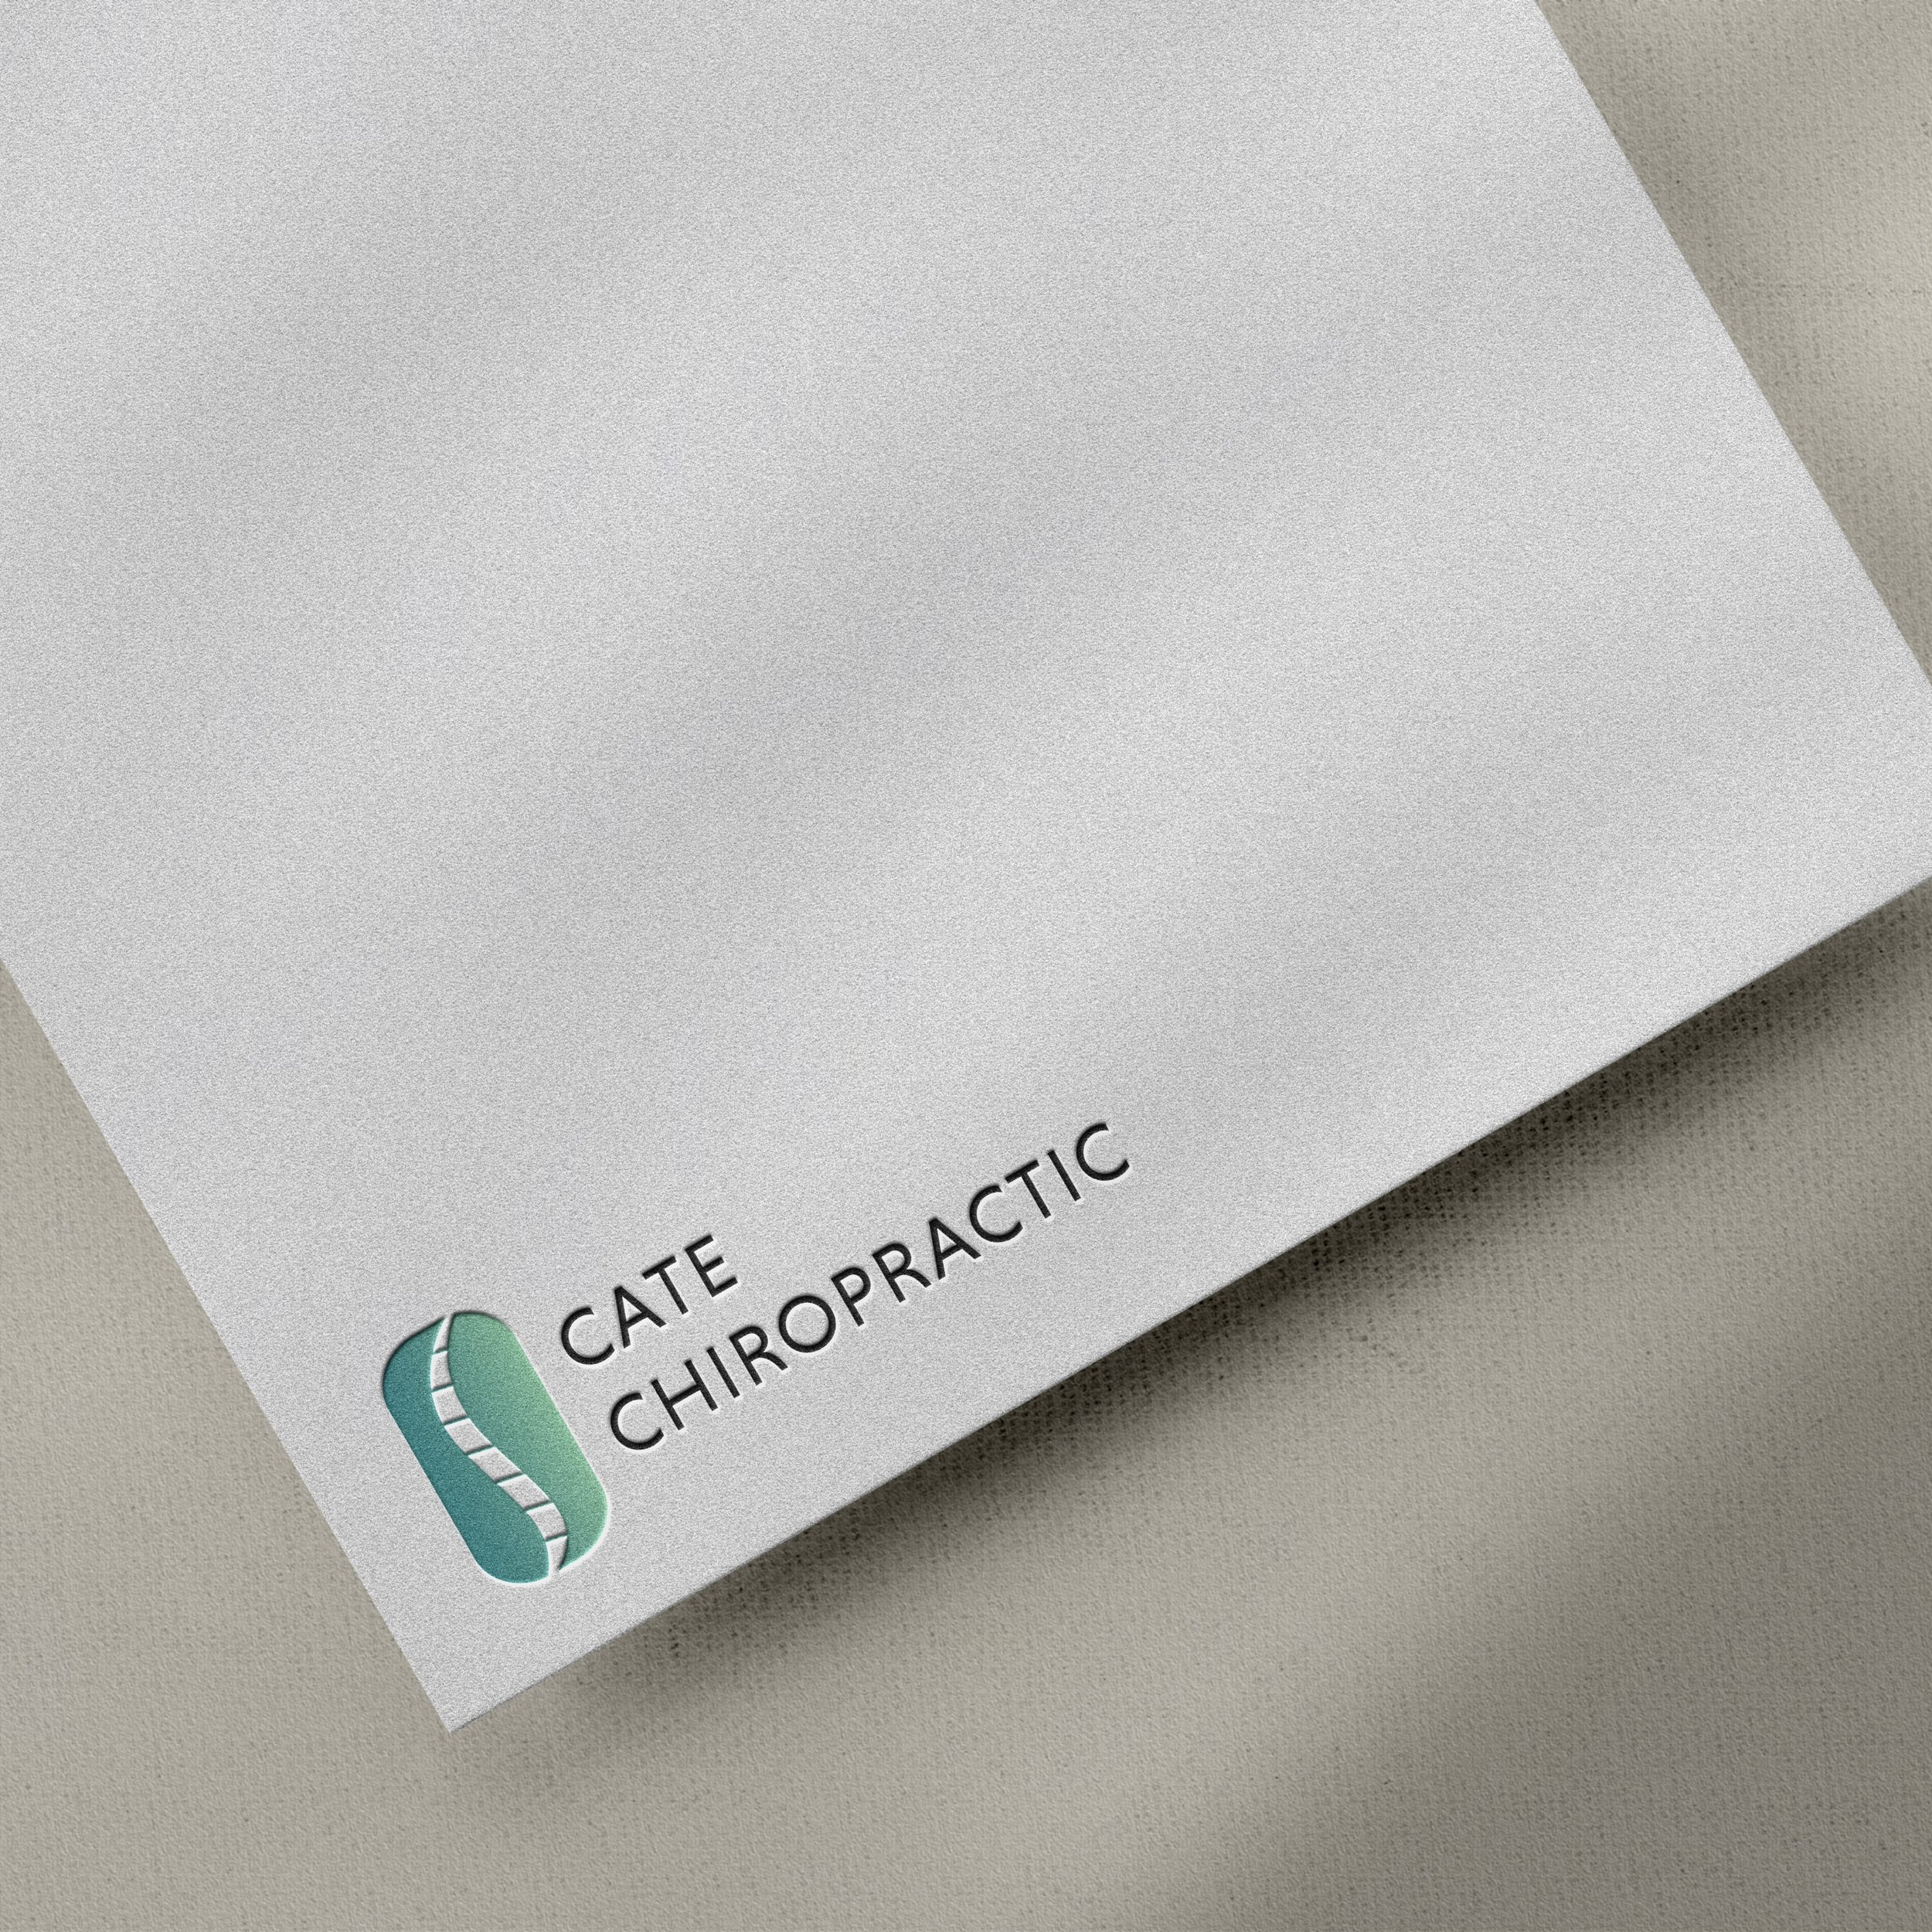 Cate-Chiropractic-Beyond-Design-Co9.jpeg